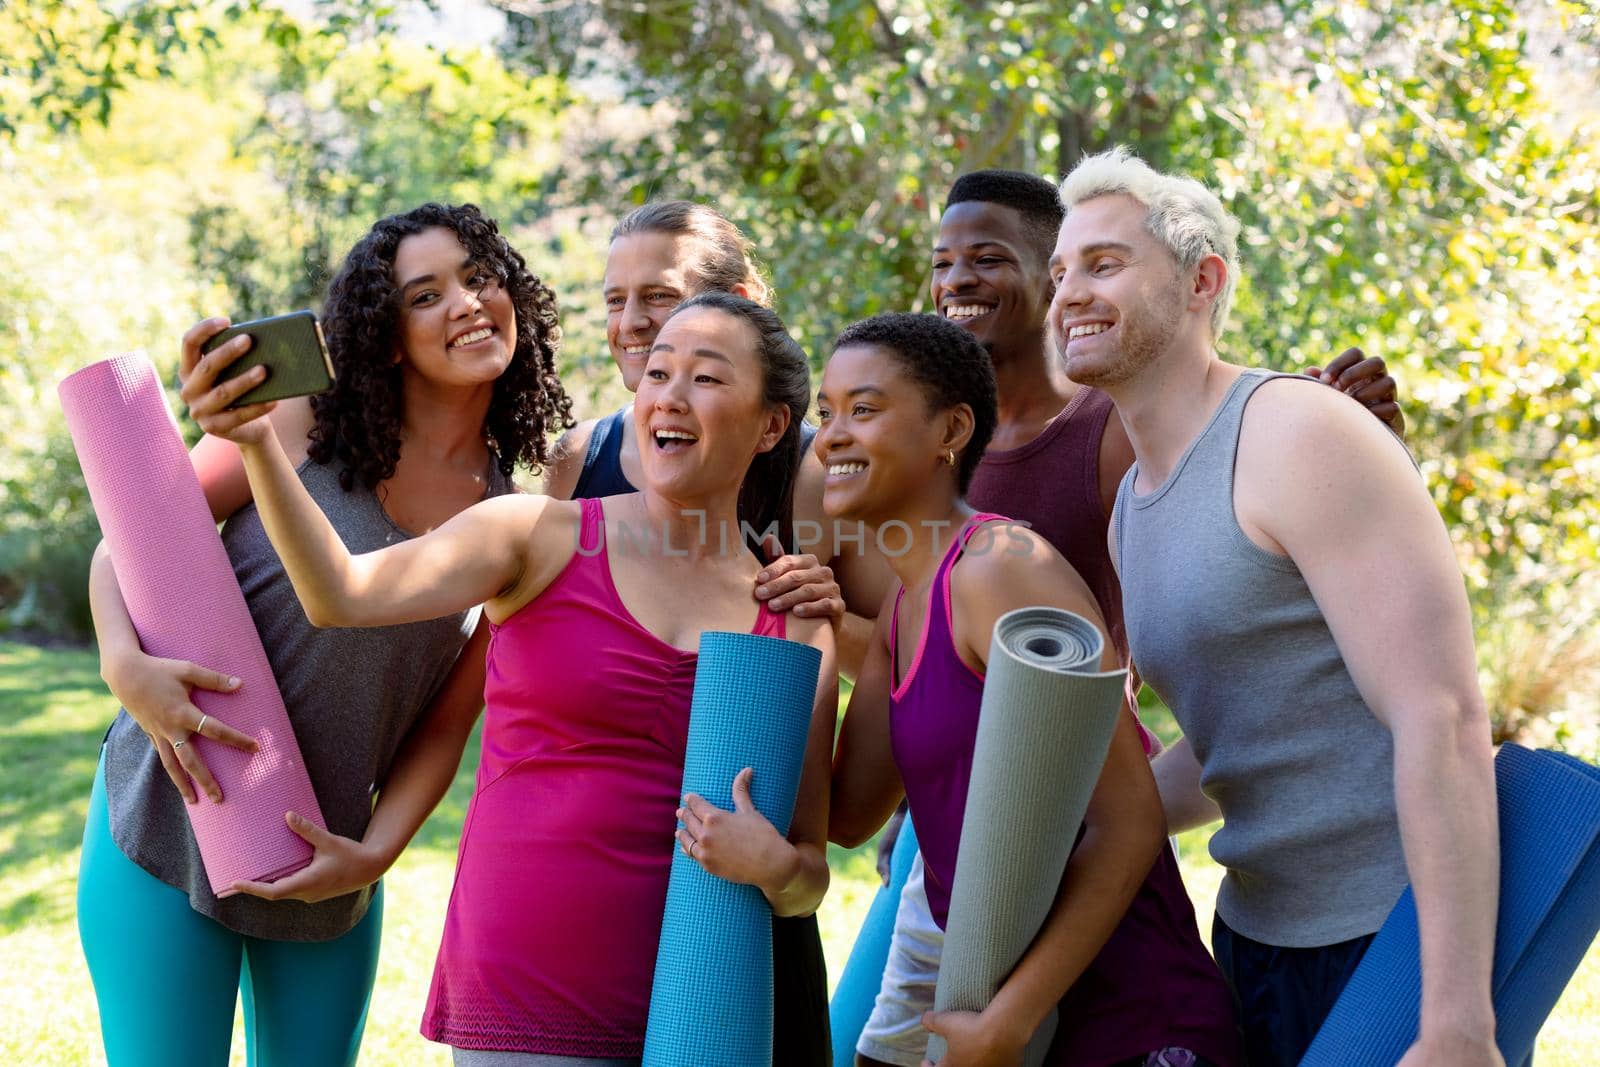 Group of happy fit diverse female and male friends holding yoga mats and taking selfie by Wavebreakmedia